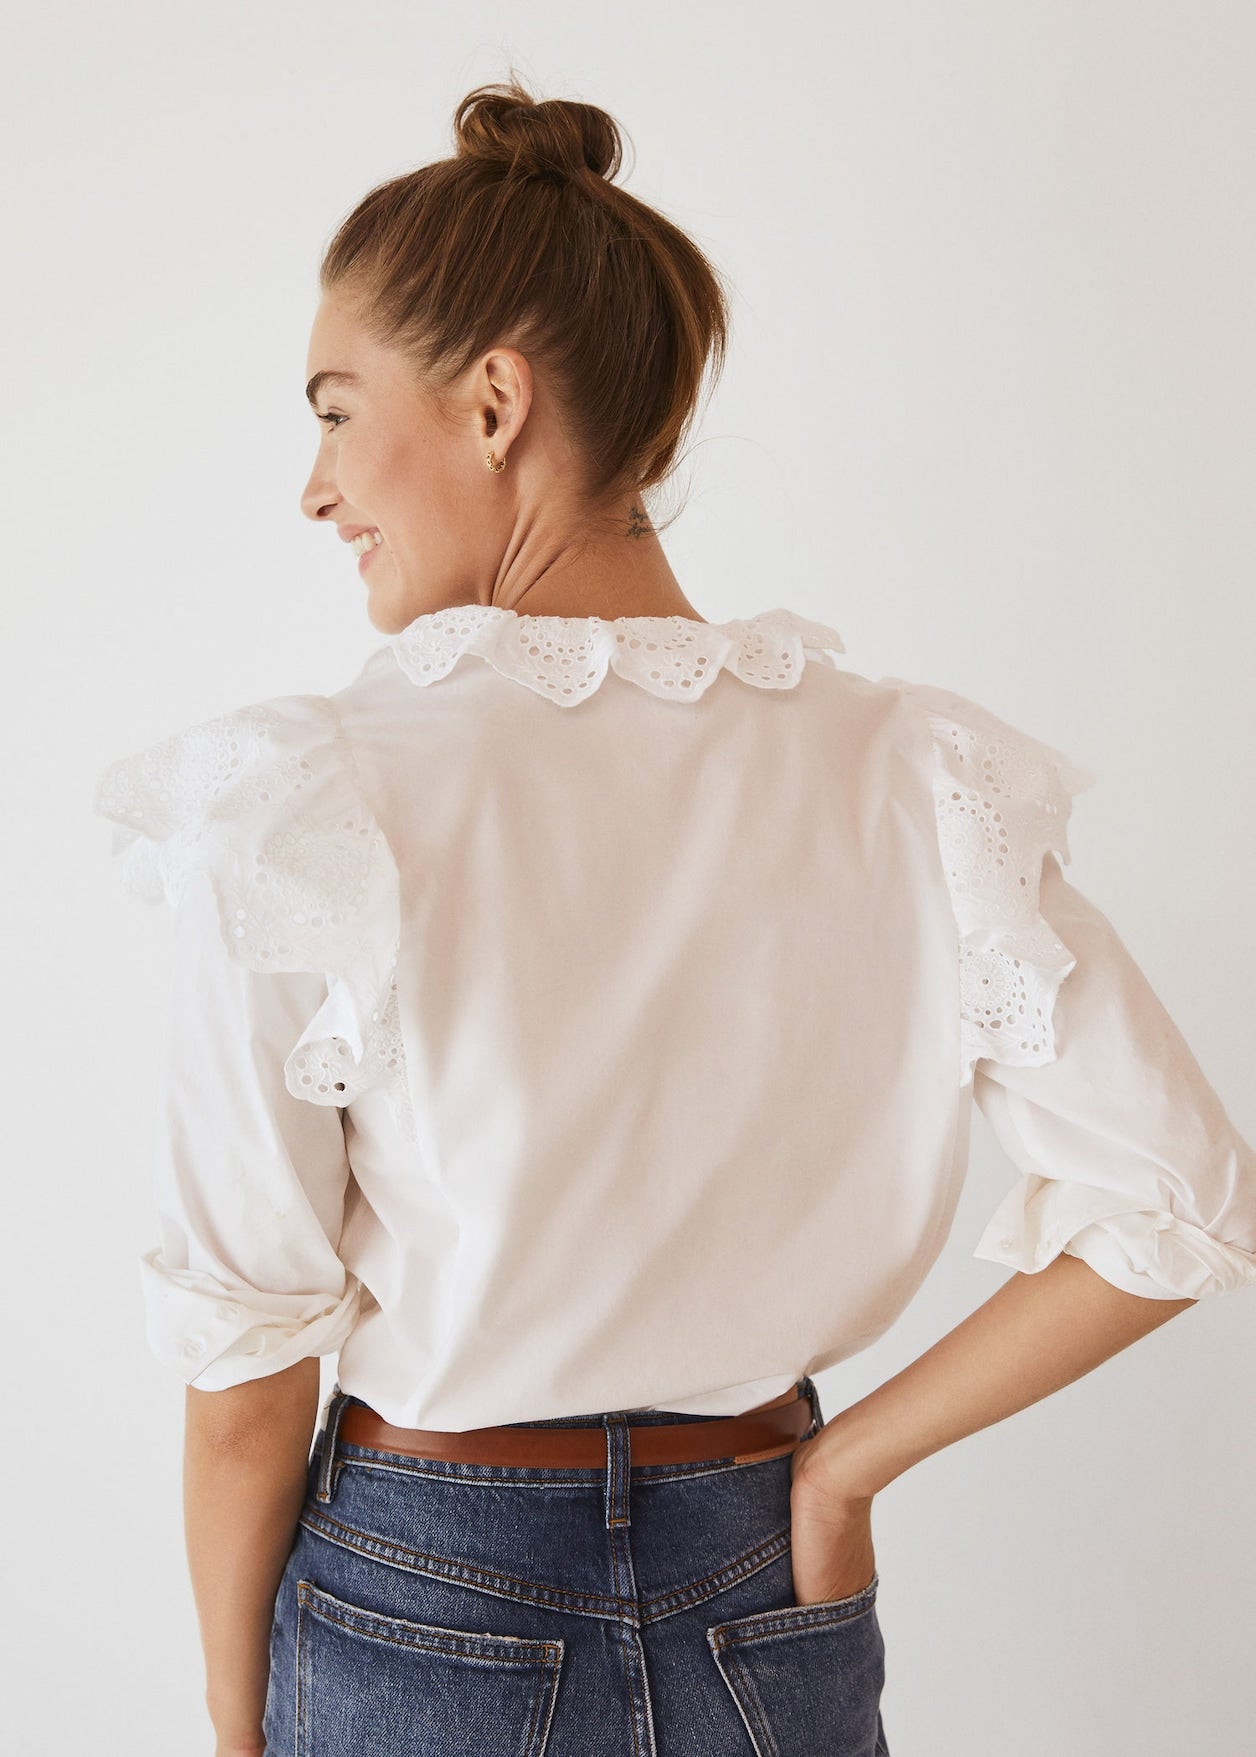 Ruffled cotton blouse from Blouses collection you can buy now from Fashion And Icon online shop